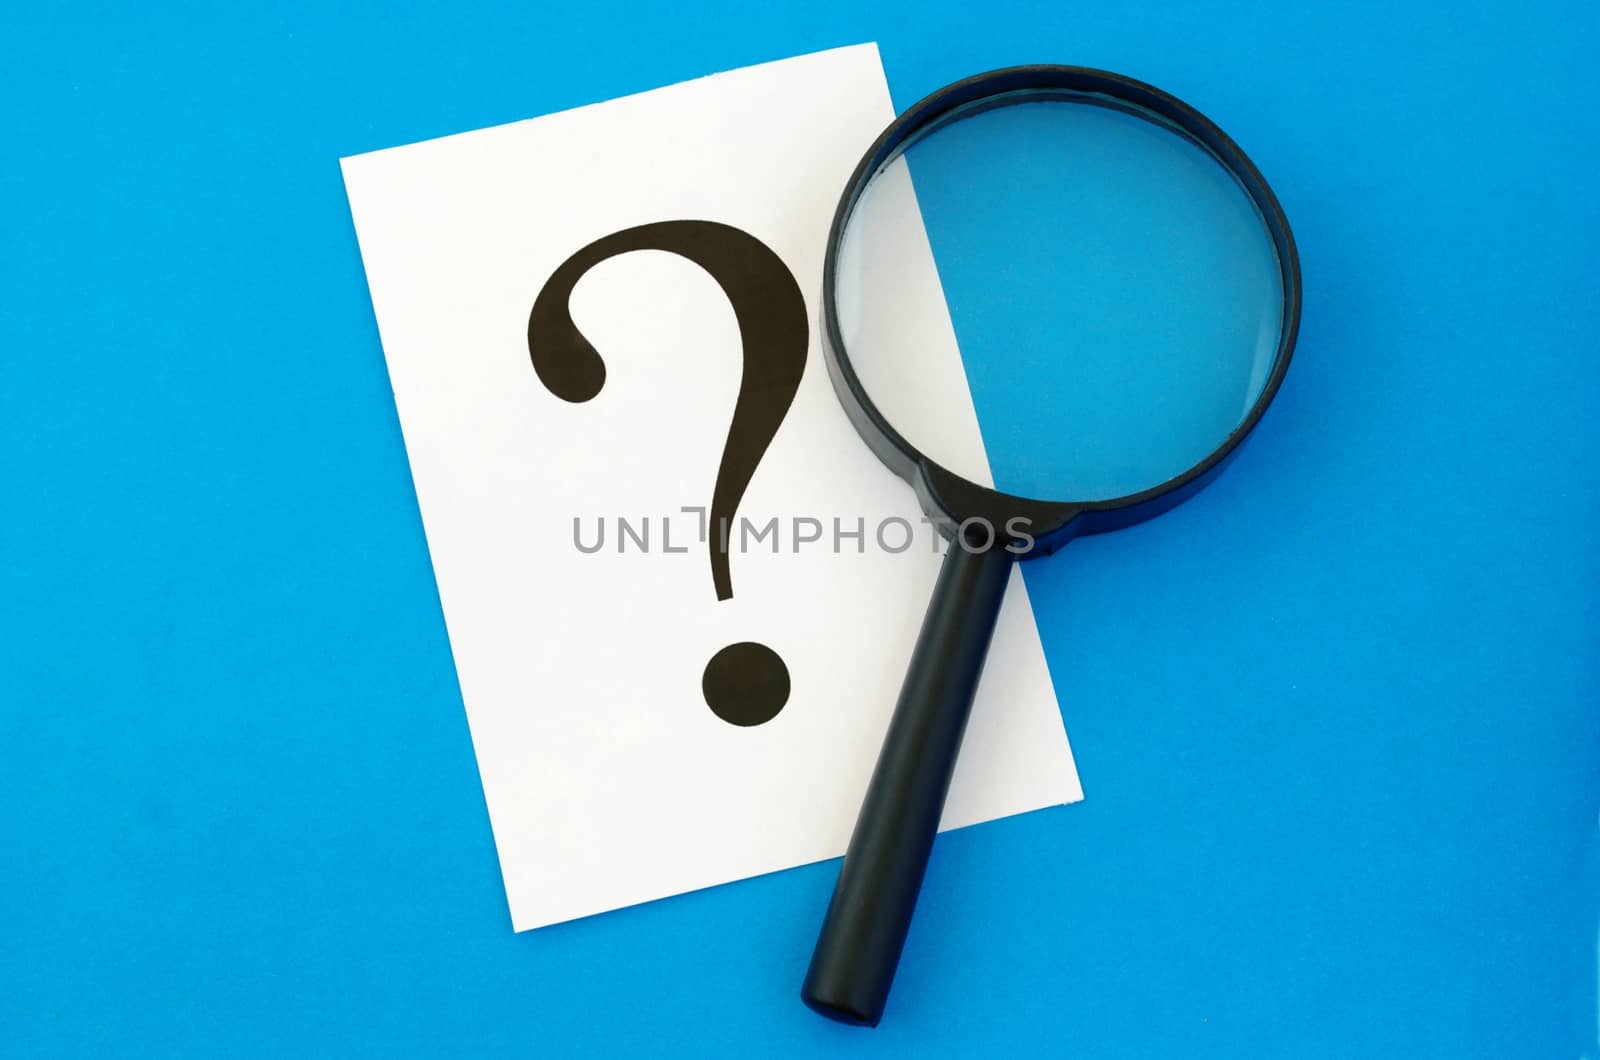 question mark on the paper and a magnifying glass